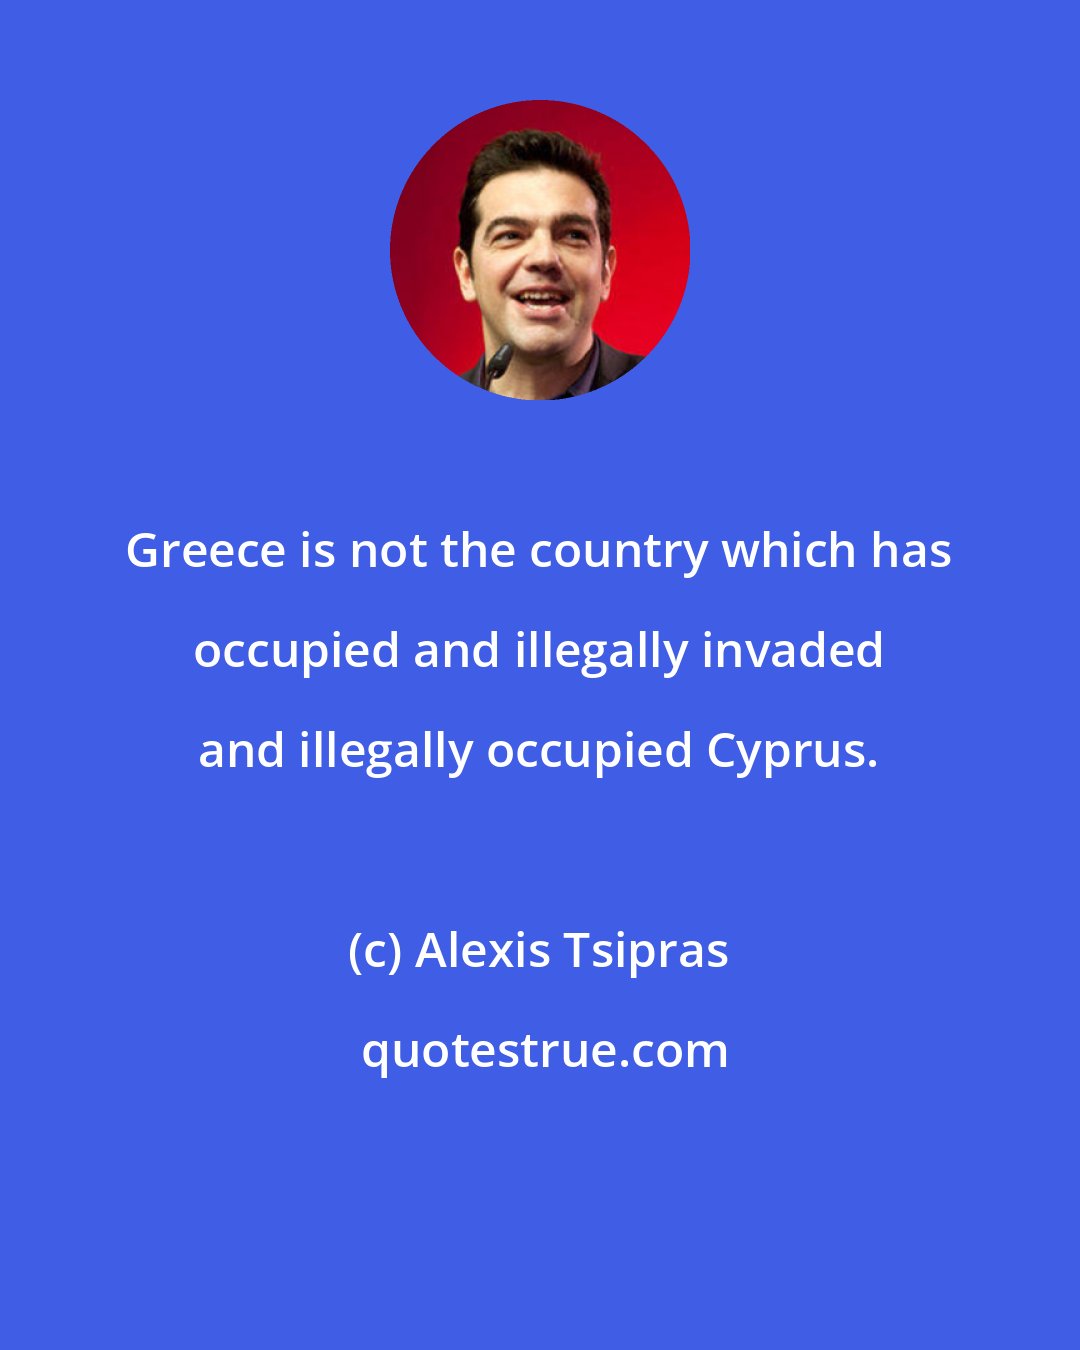 Alexis Tsipras: Greece is not the country which has occupied and illegally invaded and illegally occupied Cyprus.